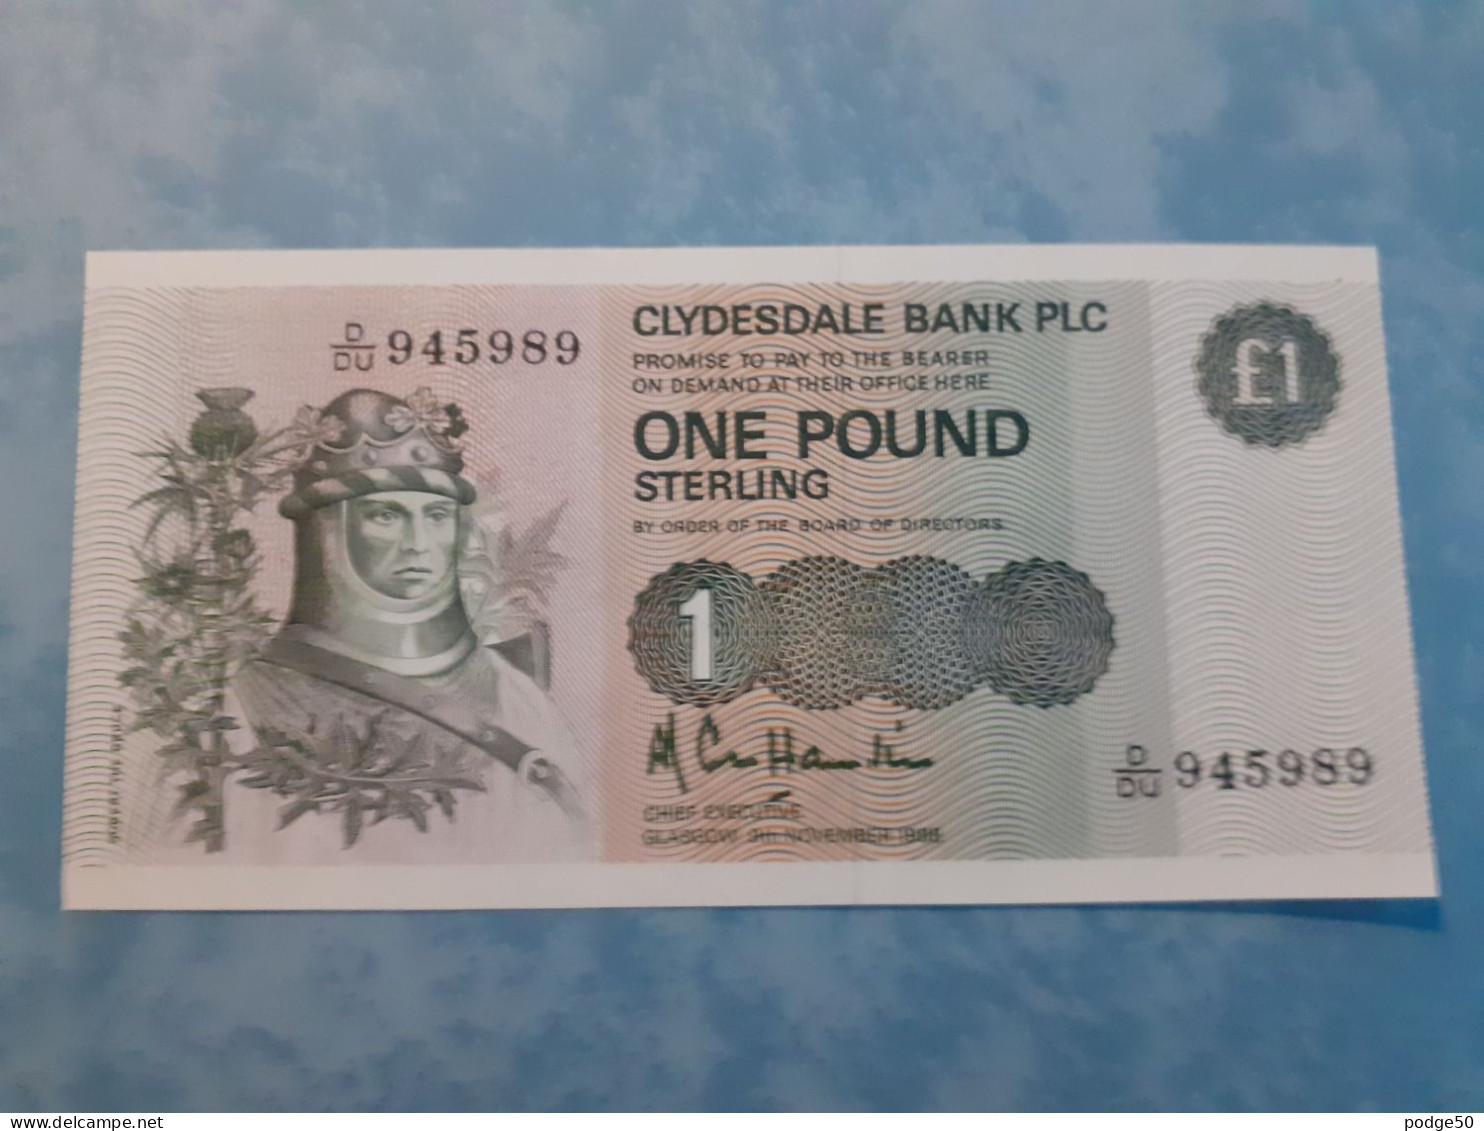 CLYDESDALE BANK 1988 LAST YEAR UNCIRCULATED £1 SIGNED A R COLE HAMILTON D/DU 945989 - 1 Pond